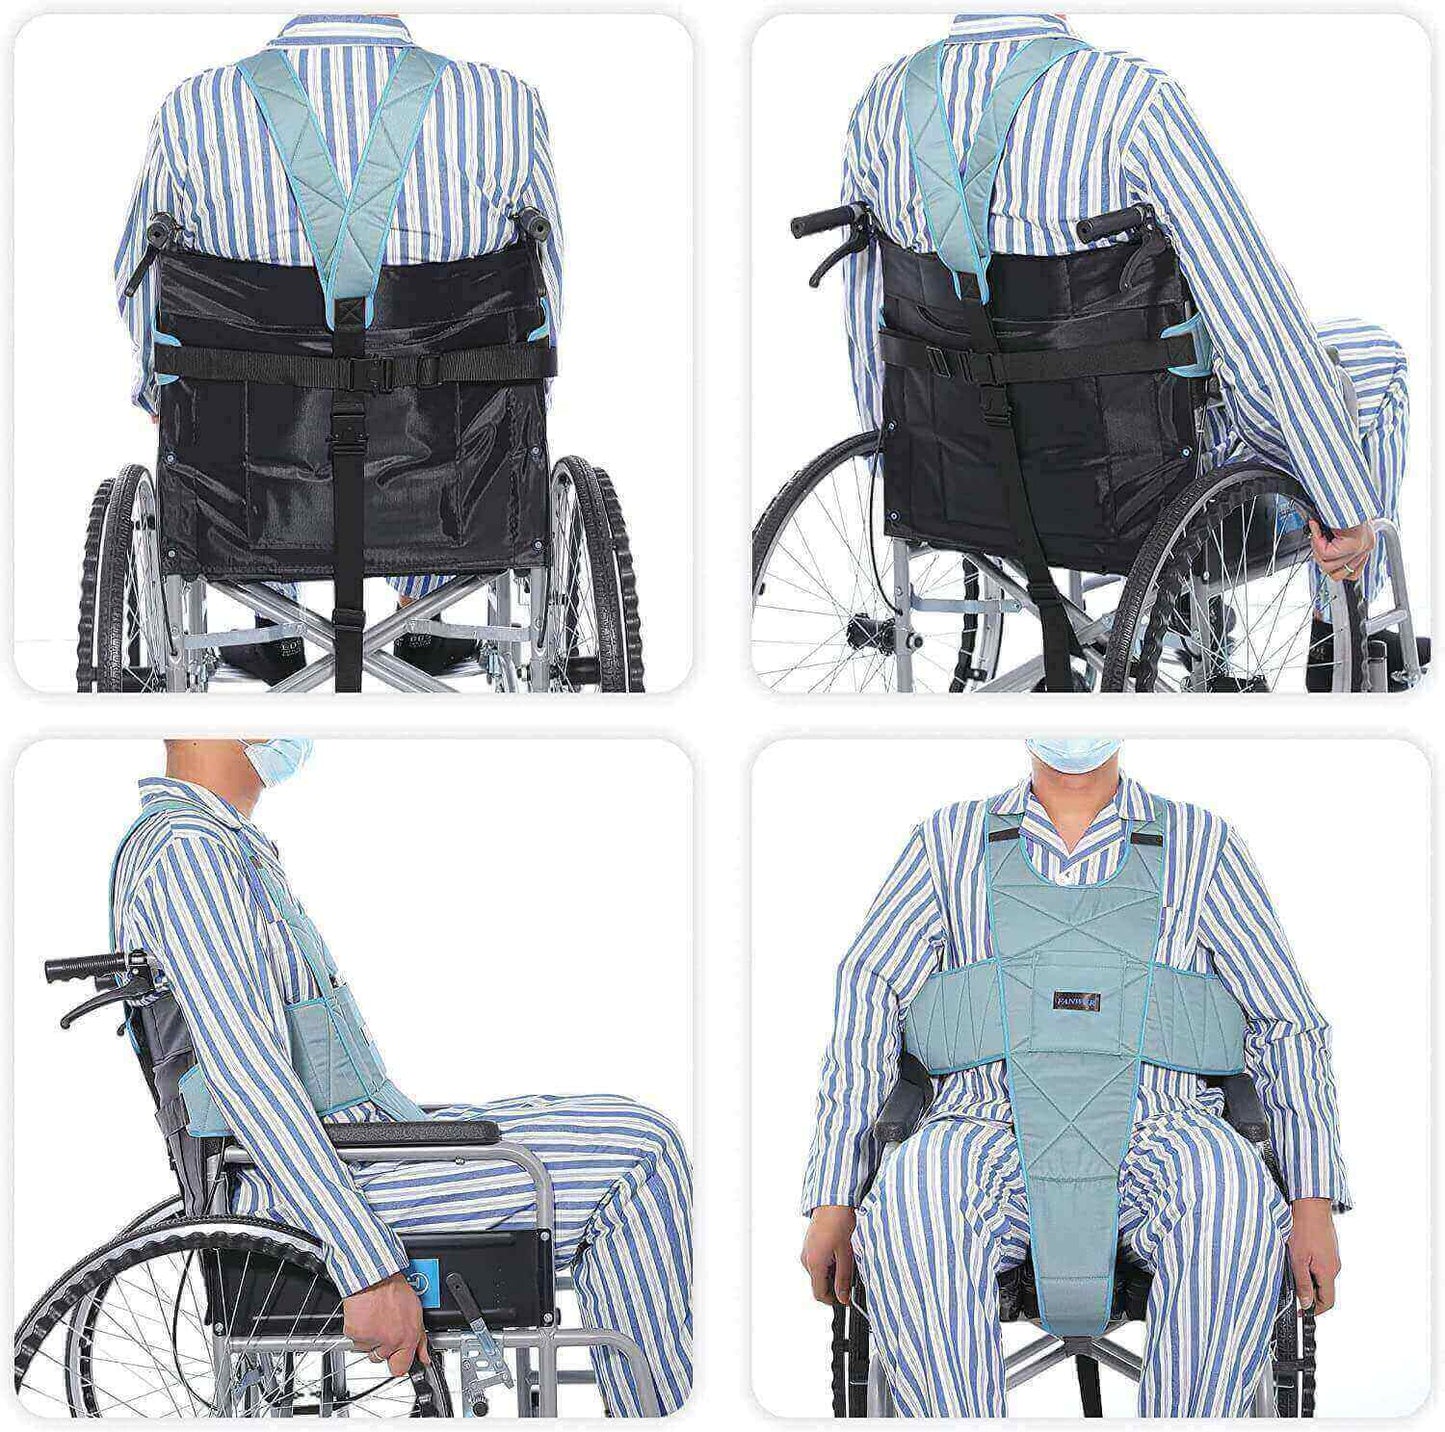 Fanwer wheelchair seat belt restraints with metal buckle guard, four sitting gestures show